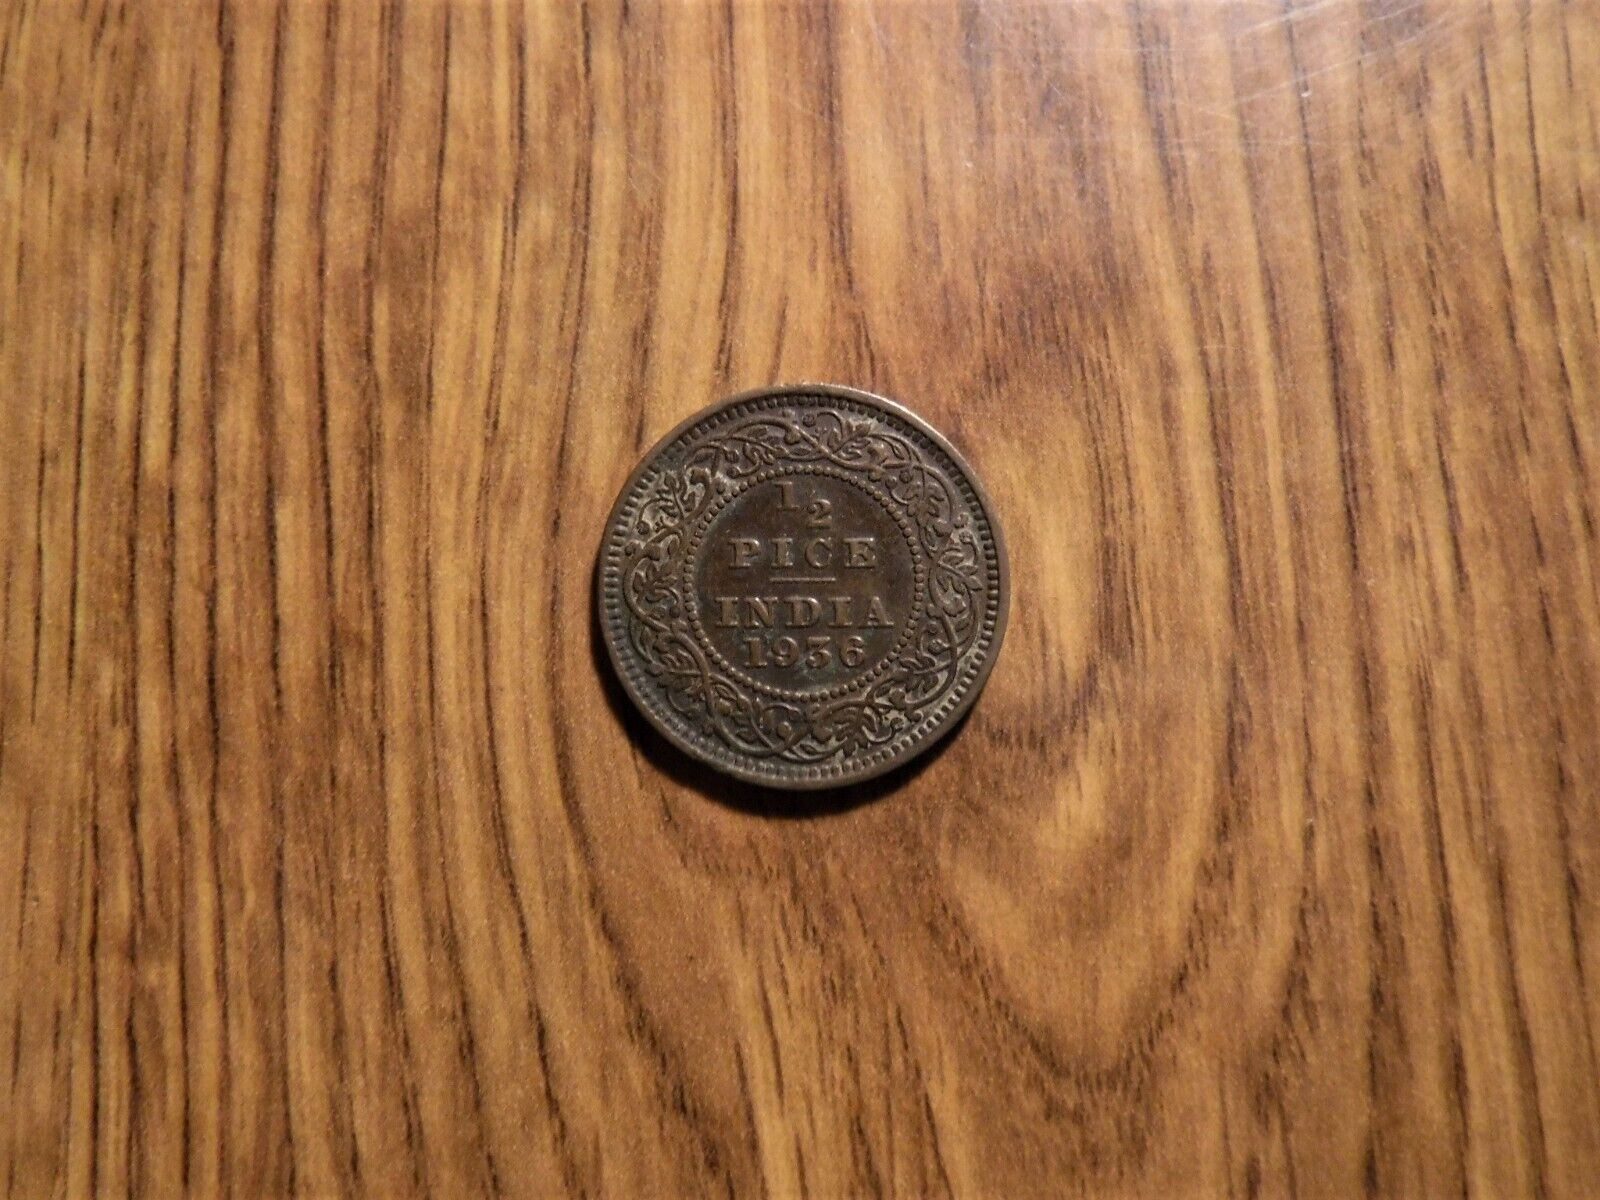 India 1/2 Pice 1936 Coin (312gs)